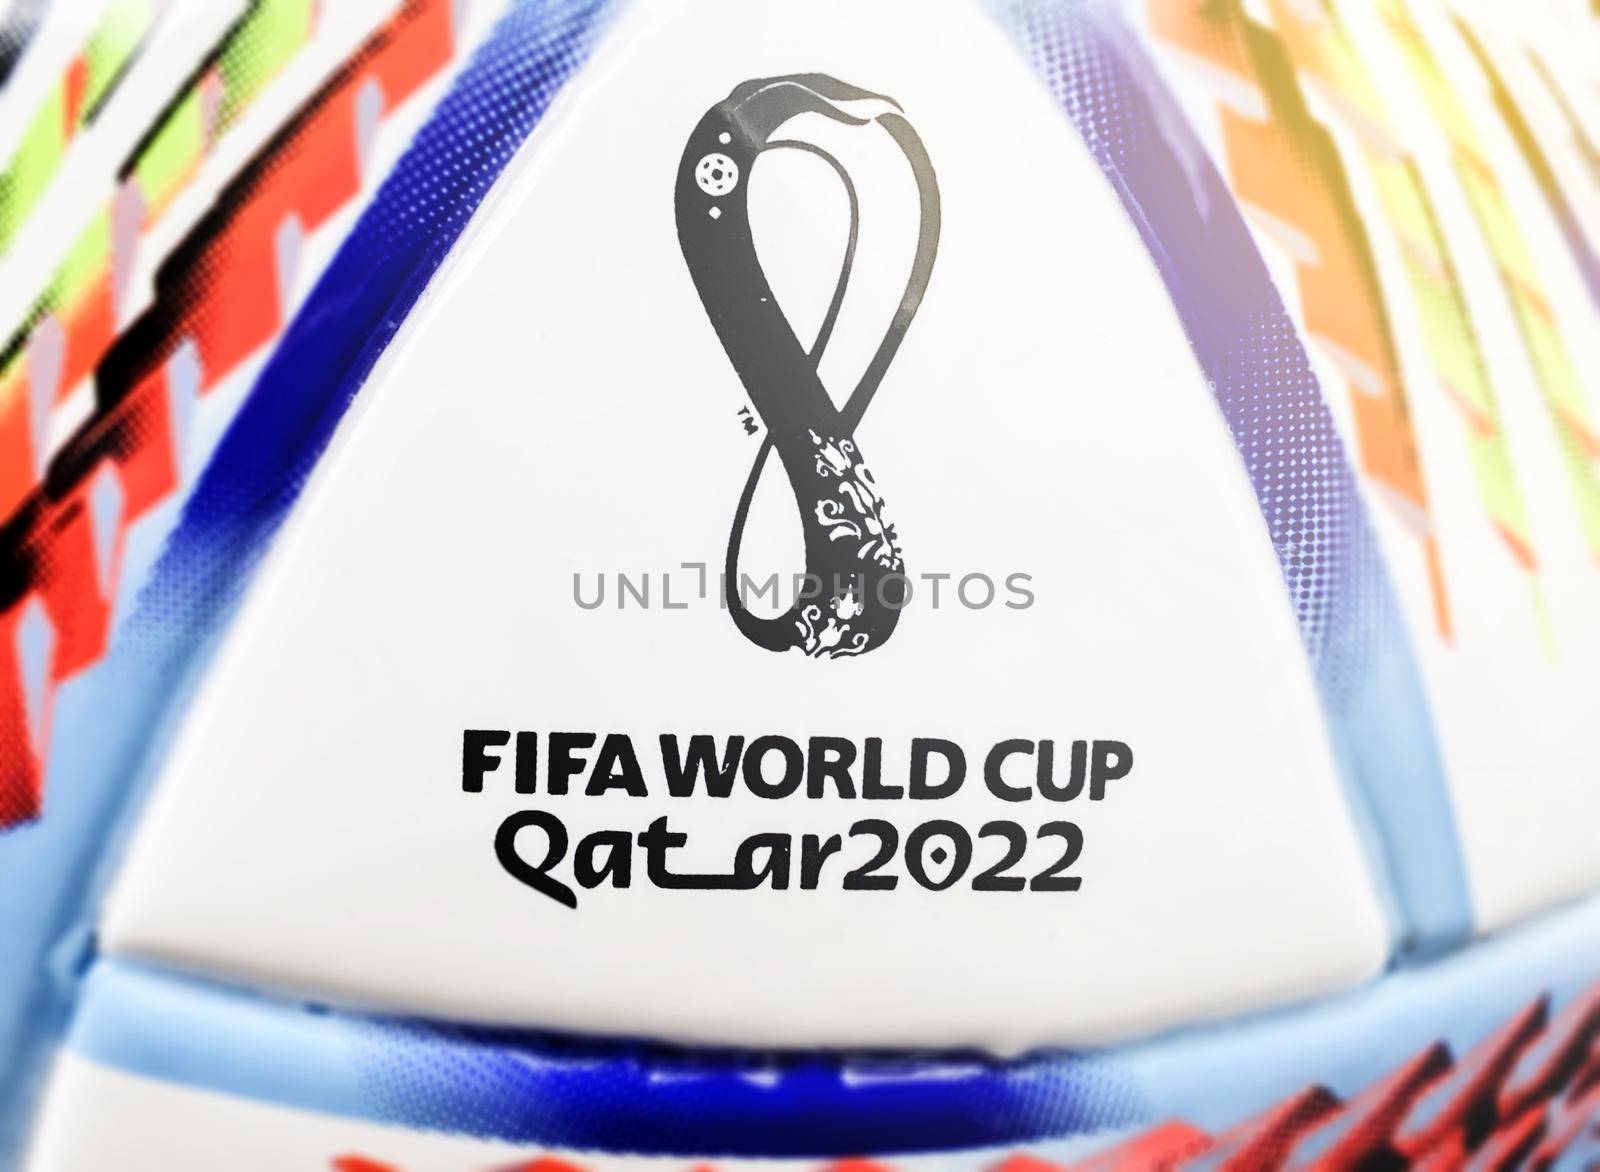 Doha, Qatar, May 2022: Close-up of Al Rihla, the official match ball of FIFA World Cup 2022 scheduled in Qatar